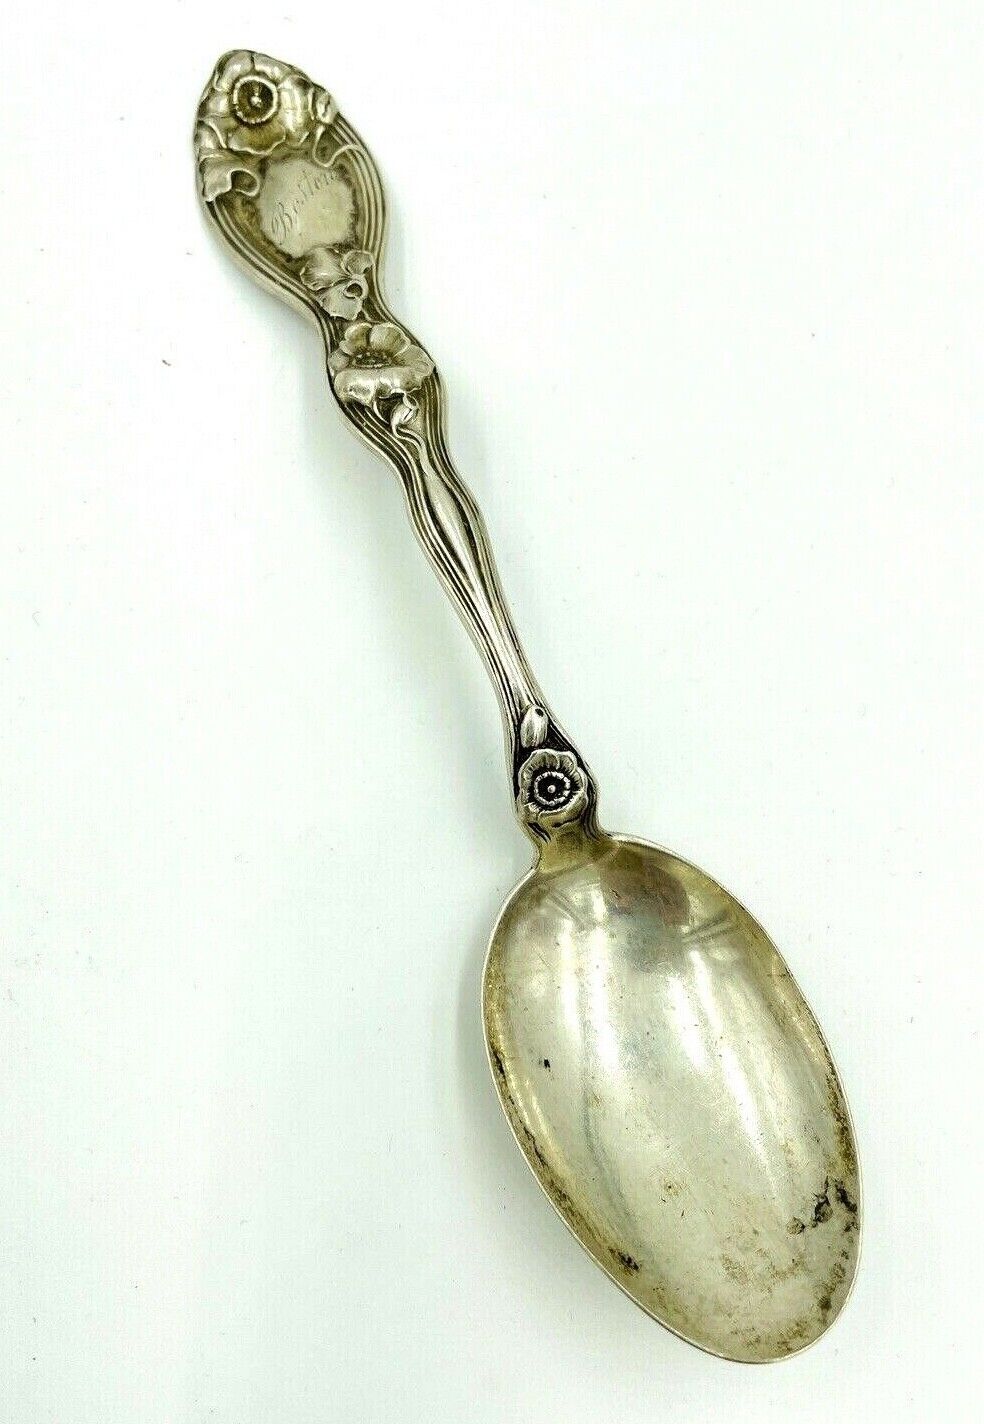 Unger Brothers Jonquil Sterling Silver Spoon 1904 6" long